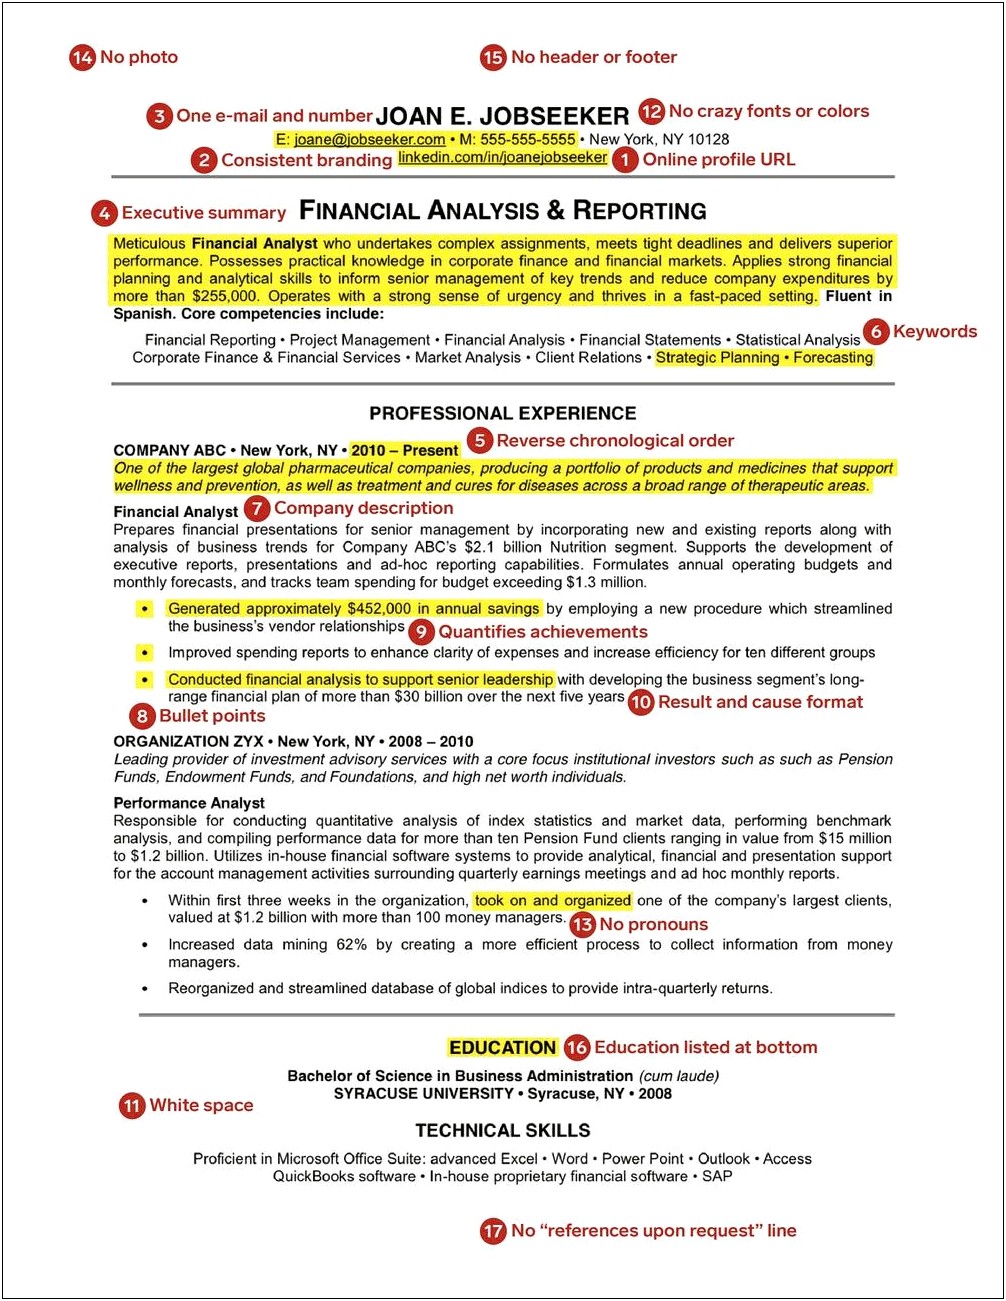 Resume Example For A Finance Graduate